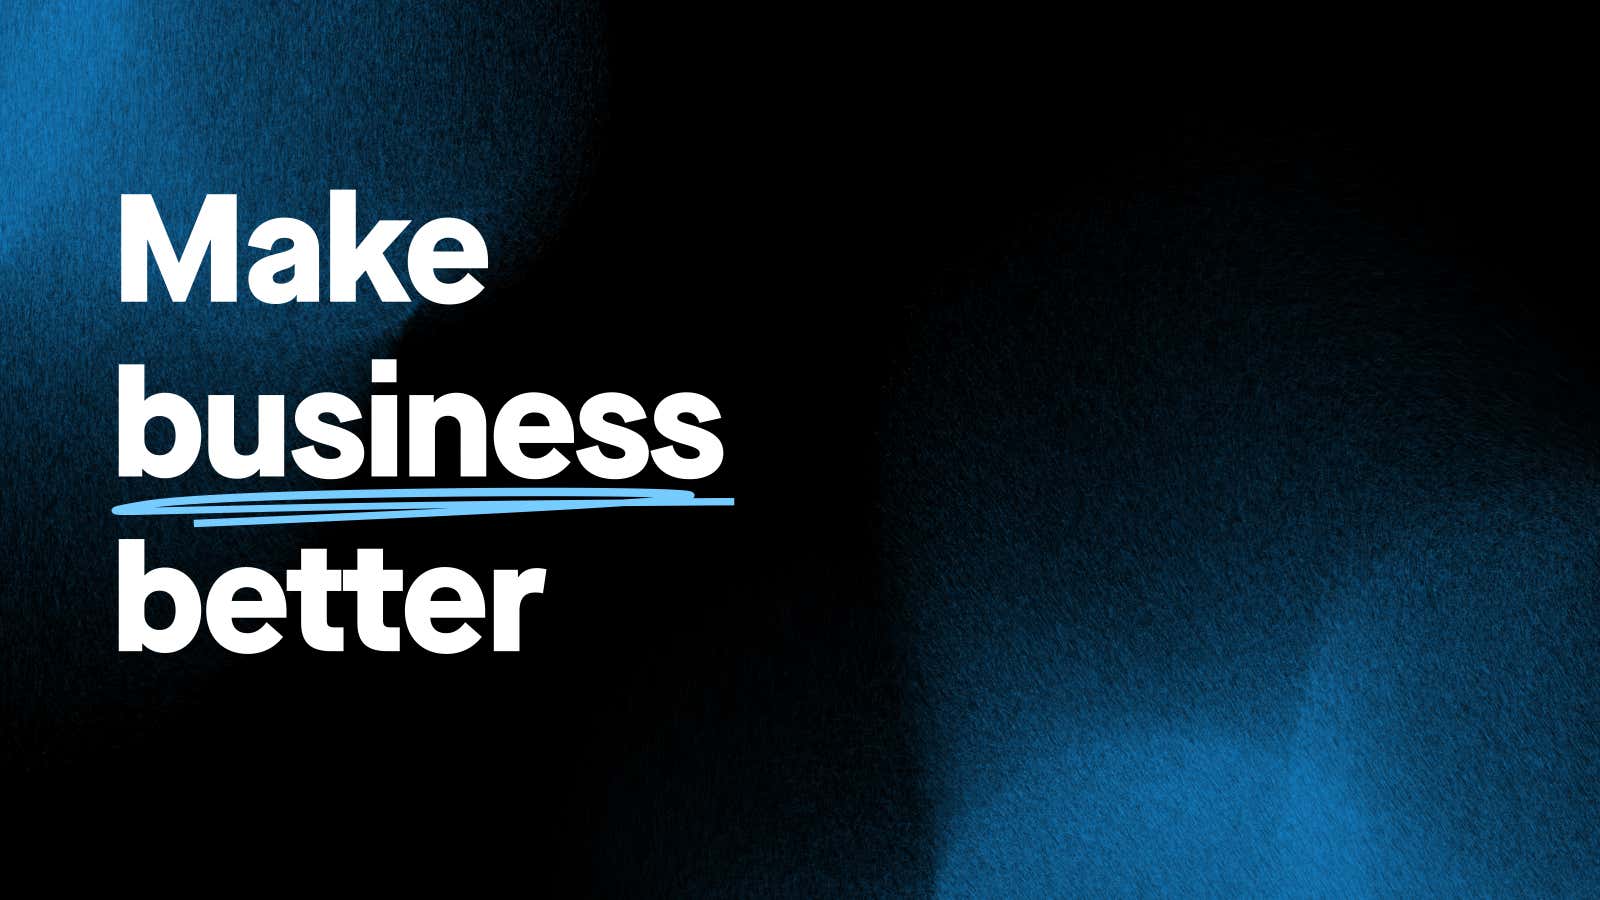 Join our mission to make business better as Quartz becomes an independent media company